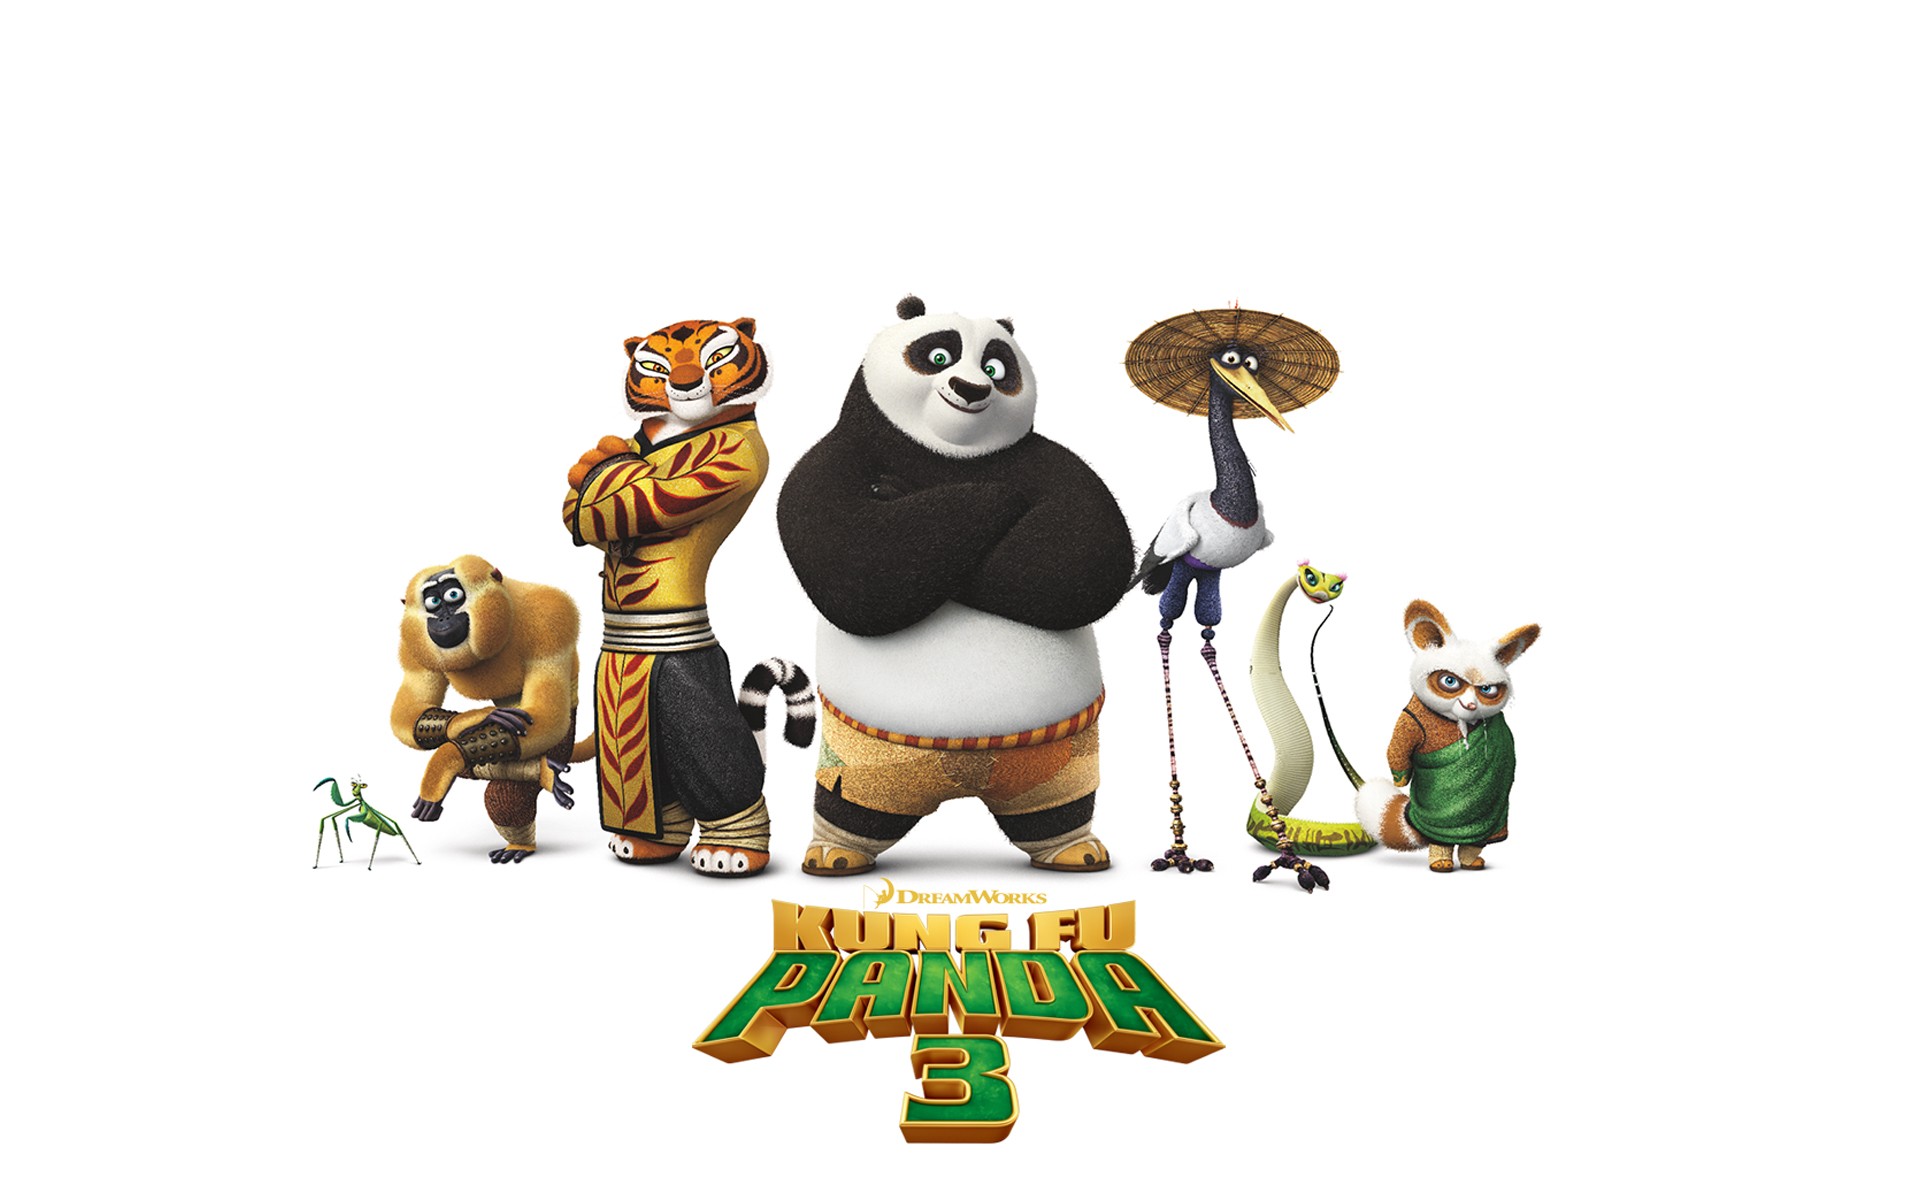 General 1920x1200 animated movies simple background kung fu panda 3 2016 (Year) movies white background